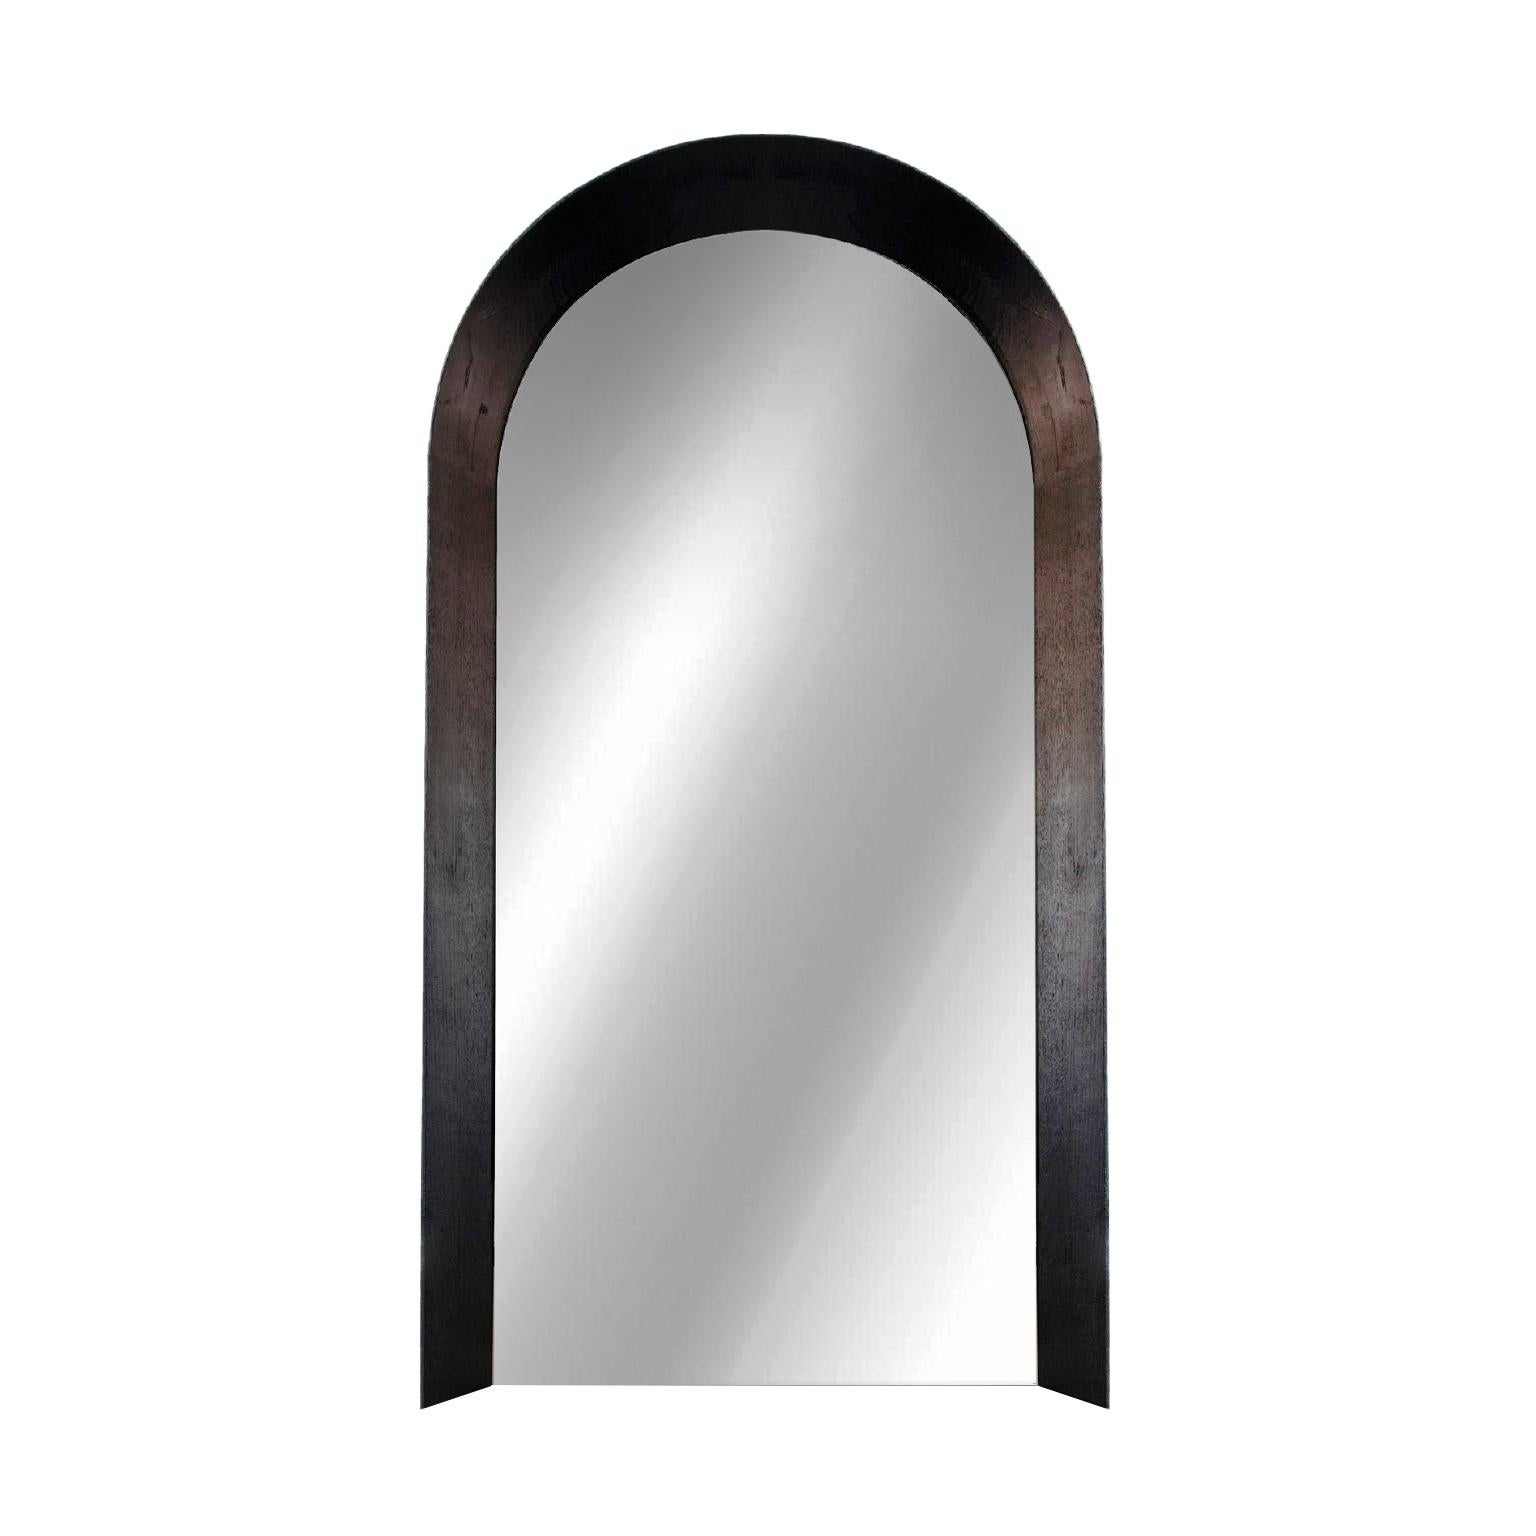 Turkish Black Painted Wooden Full Length Gate Mirror (Lead time 5 weeks) For Sale